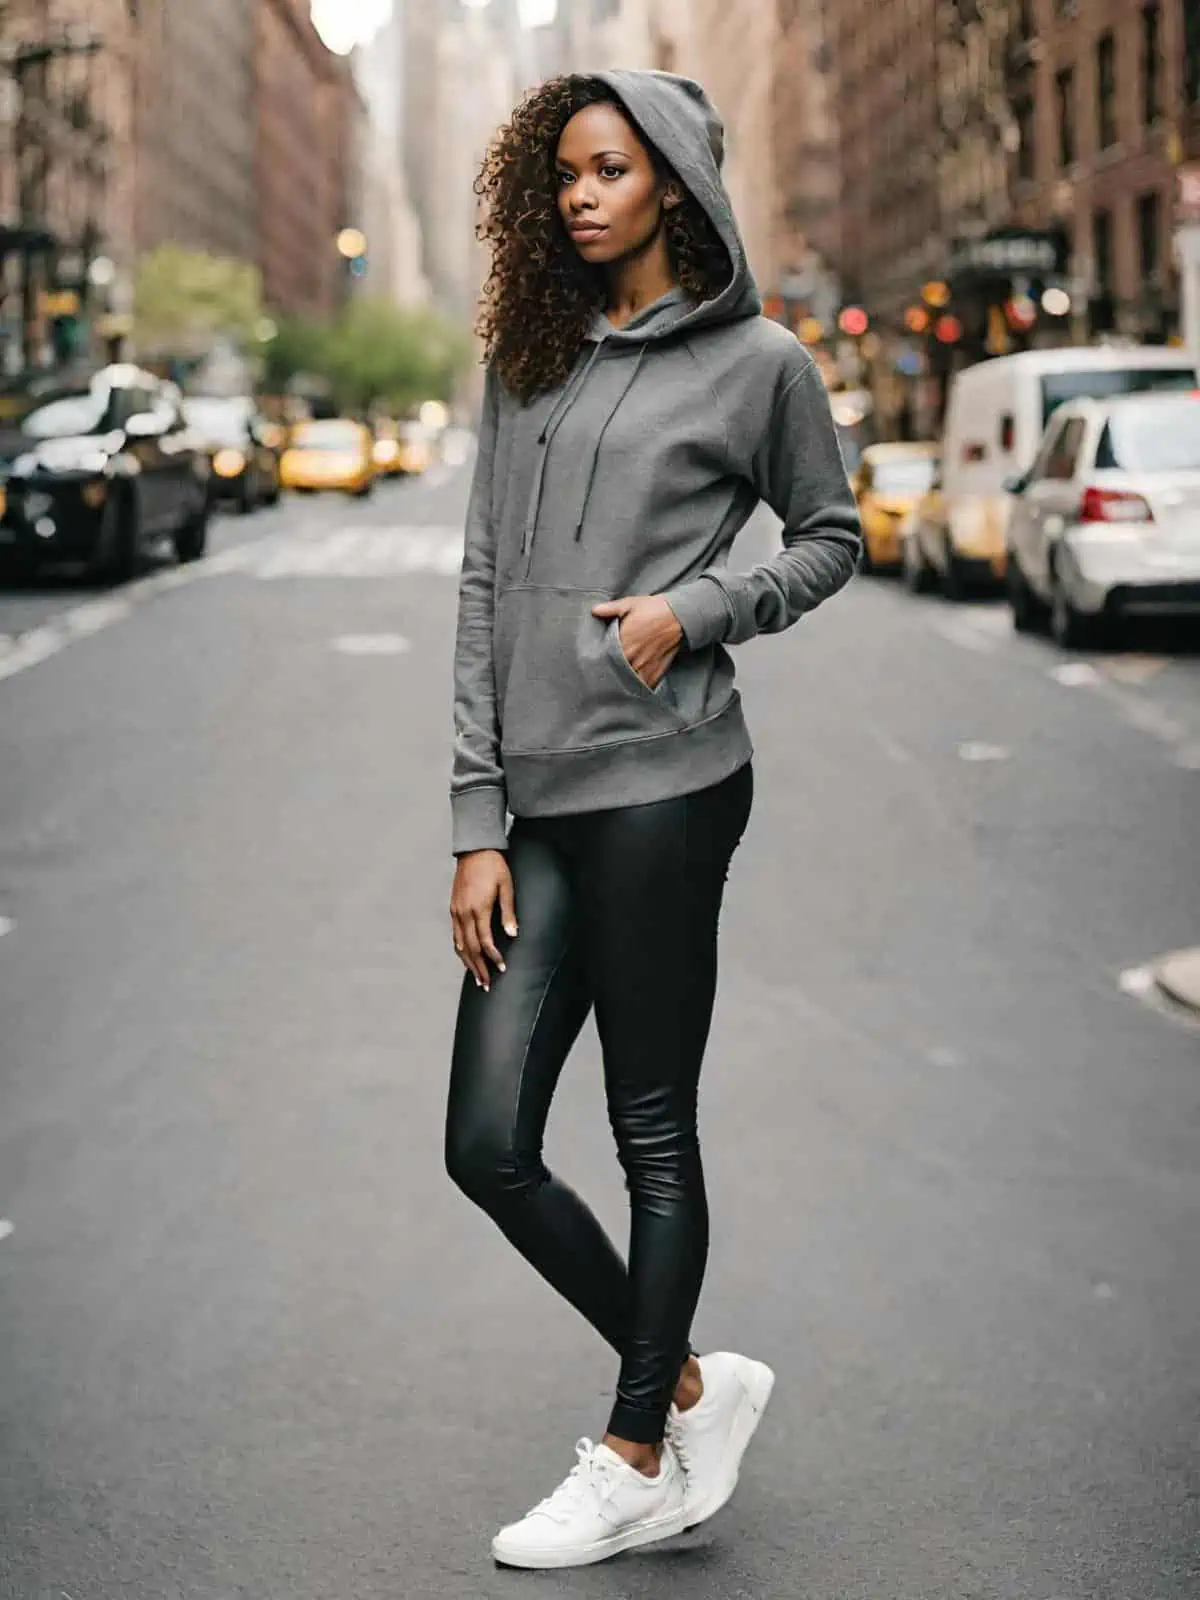 Chic Leather Legging Outfit hoodie